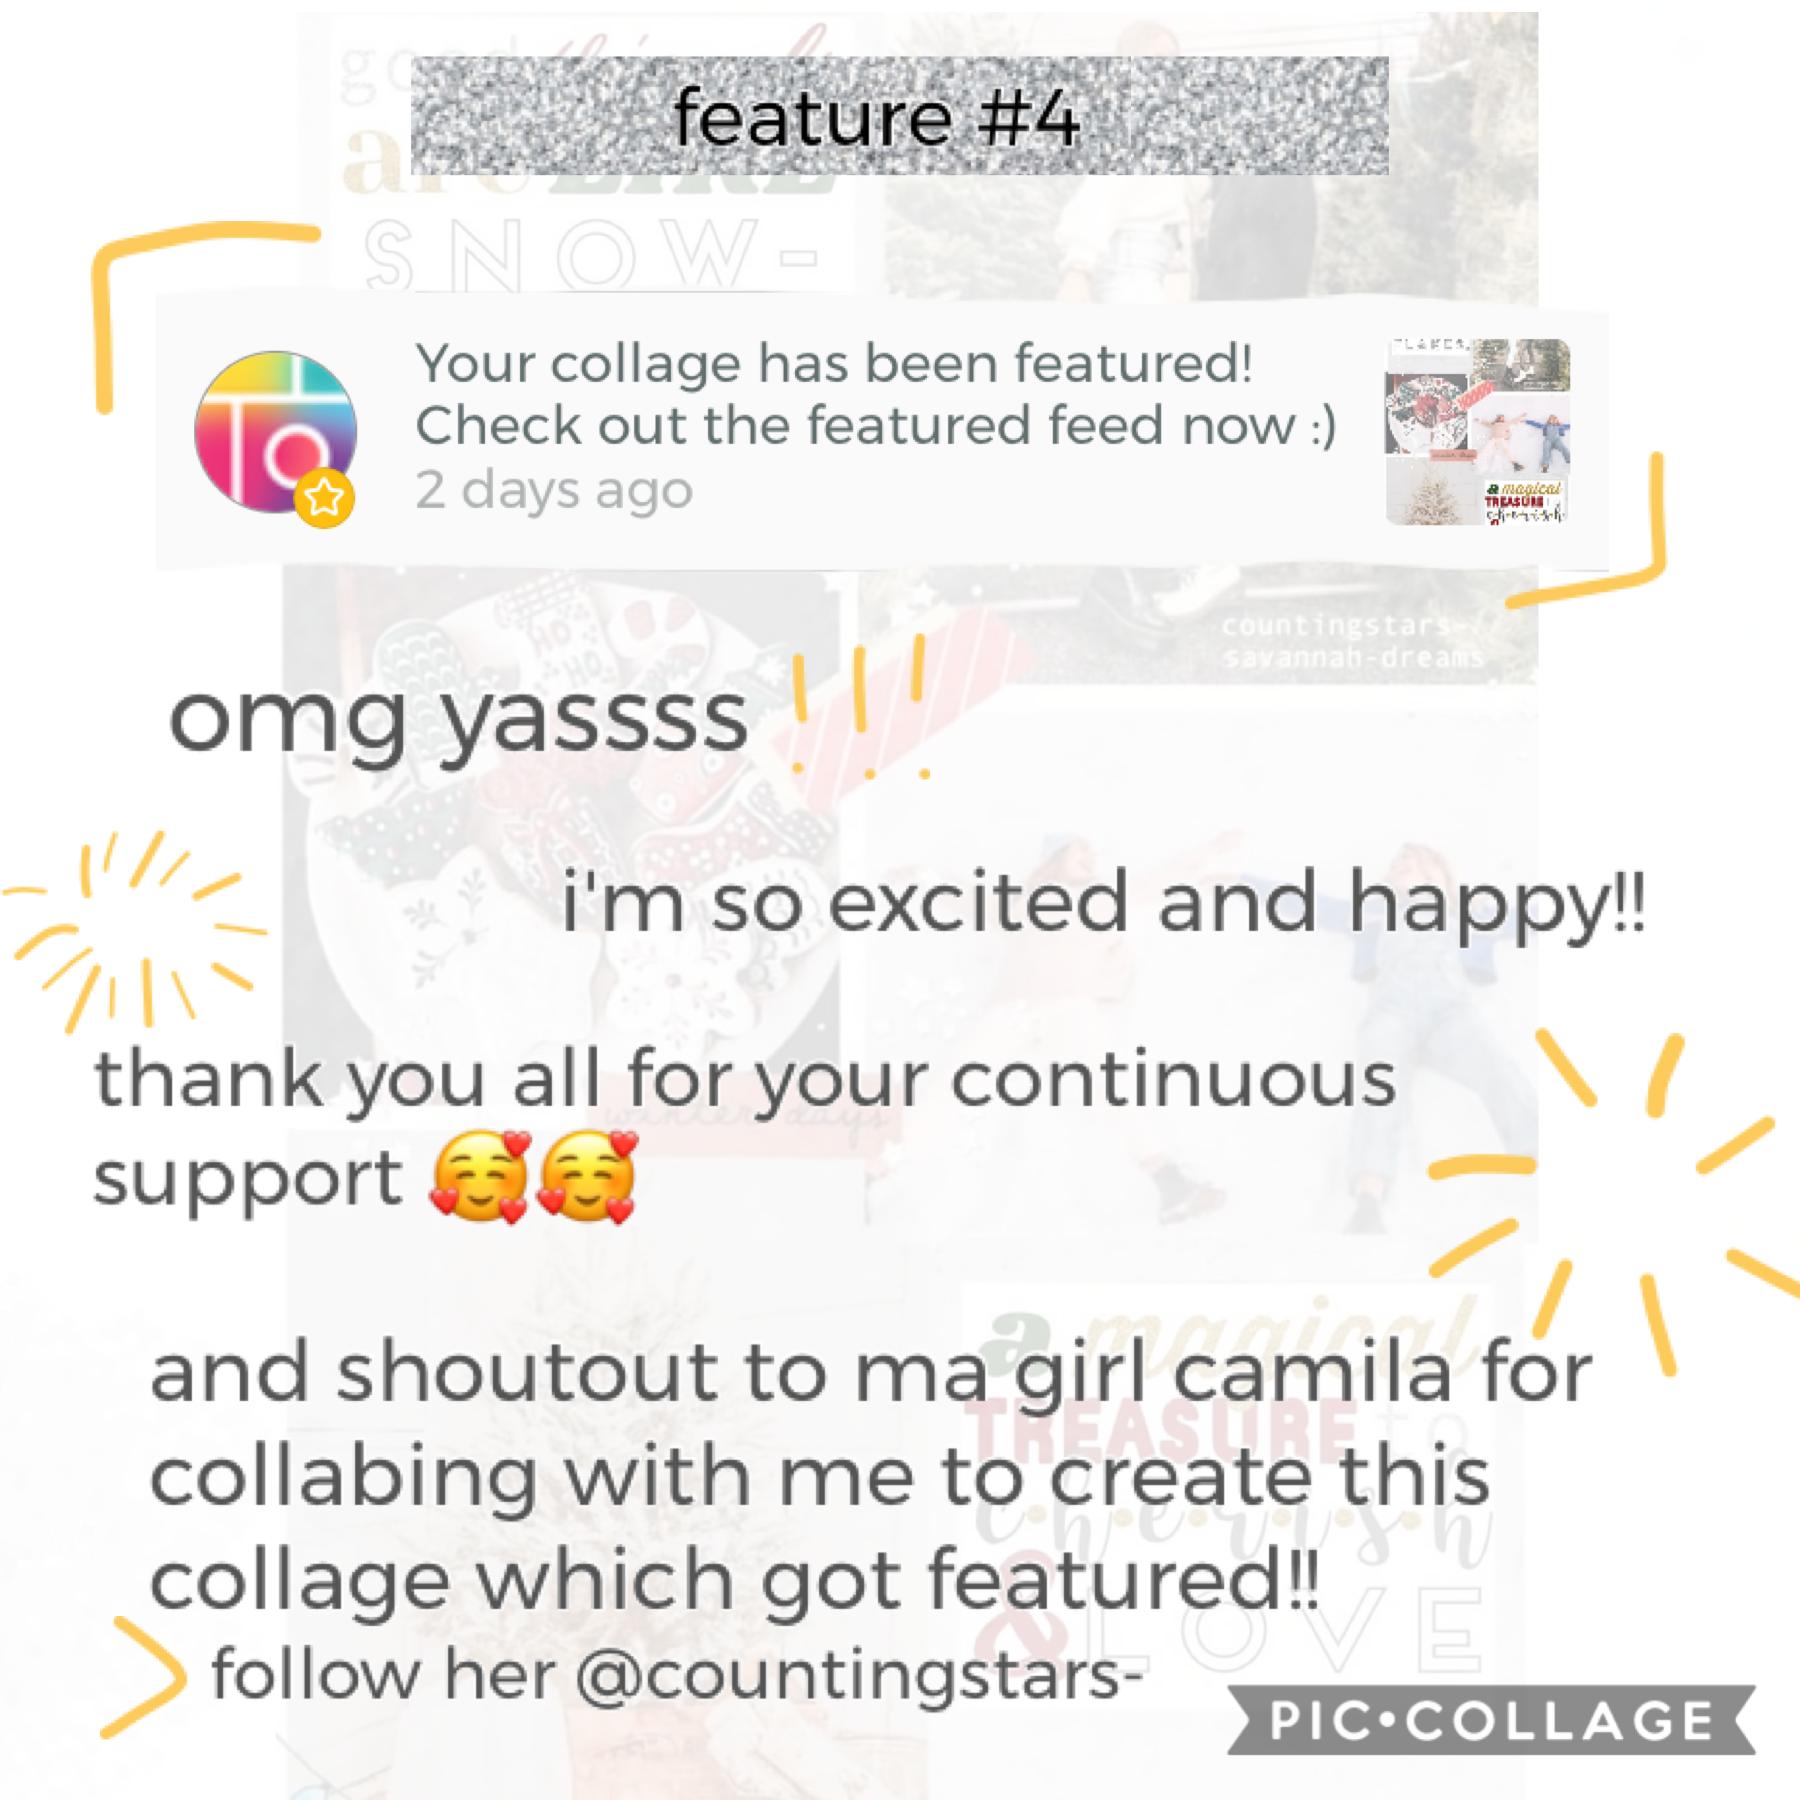 eeee 🤩🥰 thank you everyone in the pc community and of course the pc creators themselves for featuring our collage 🌈🌈